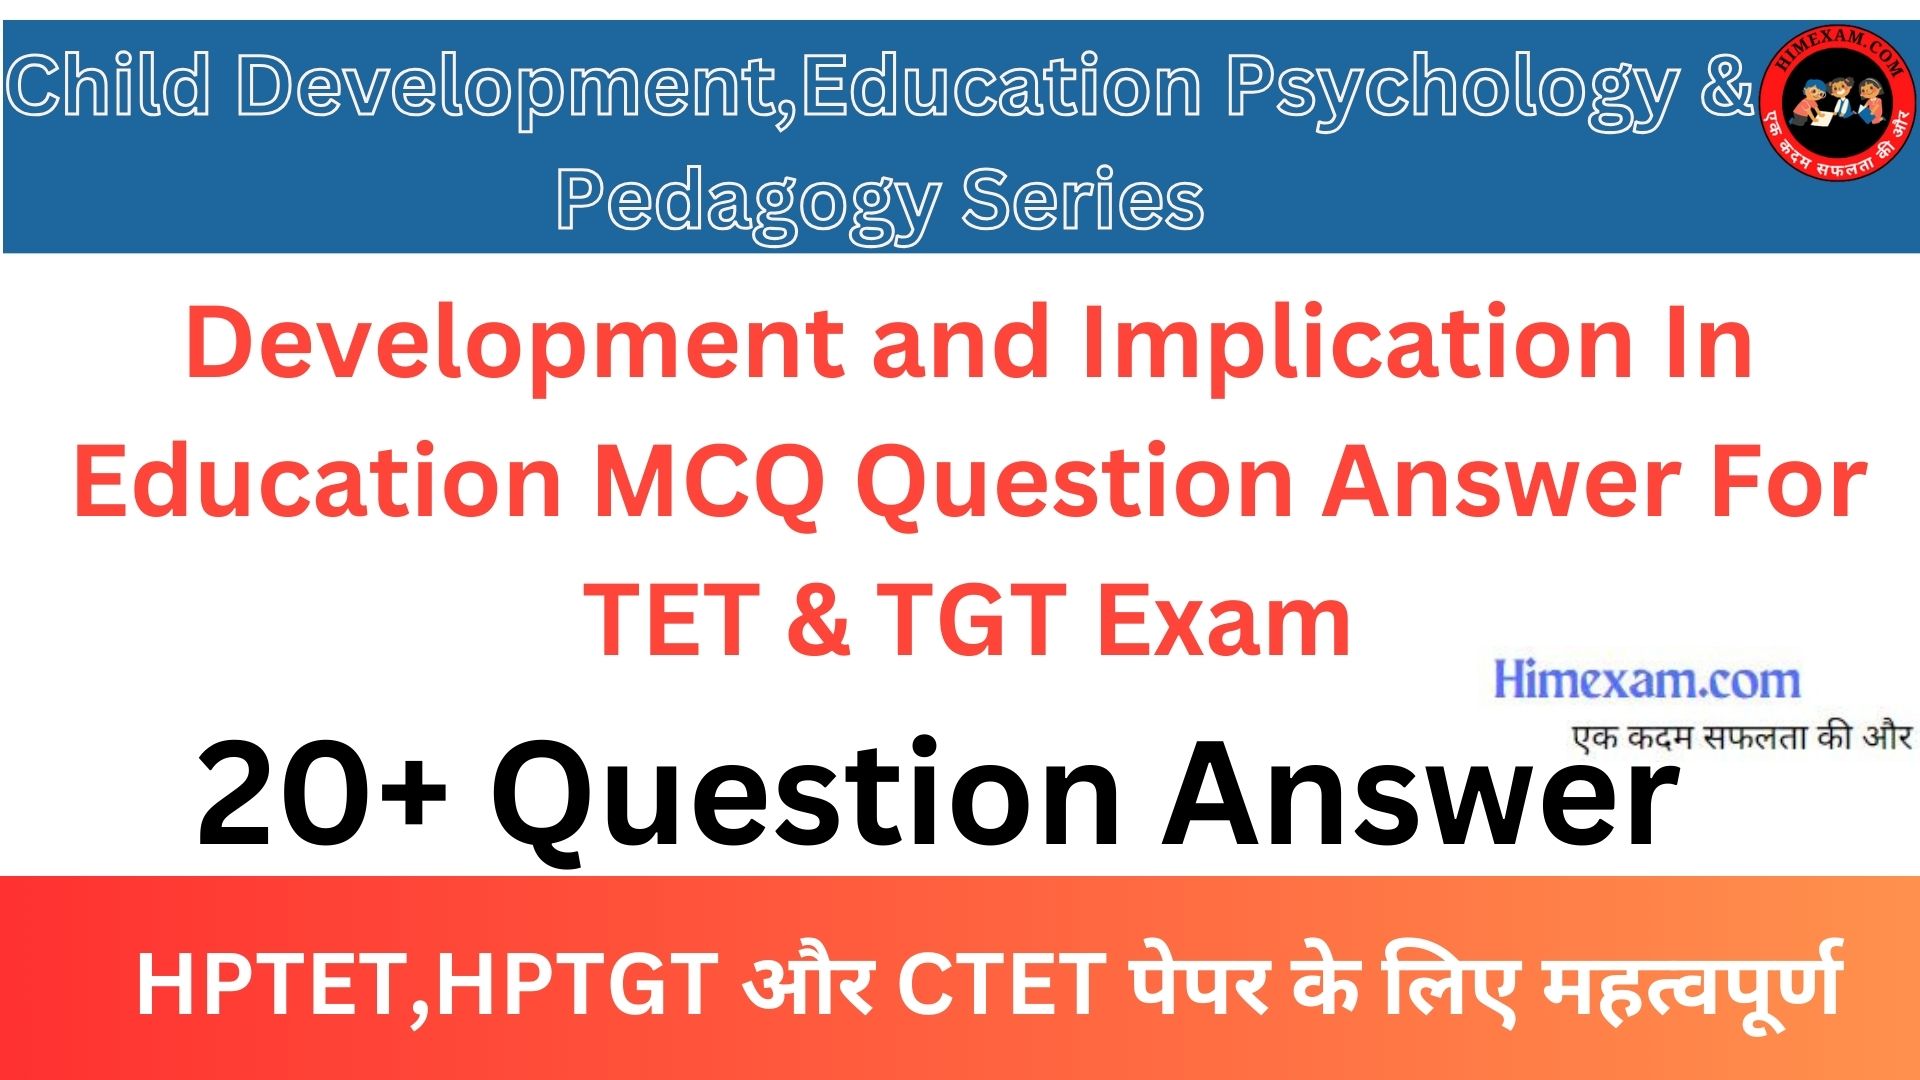 Development and Implication In Education MCQ Question Answer For TET & TGT Exam